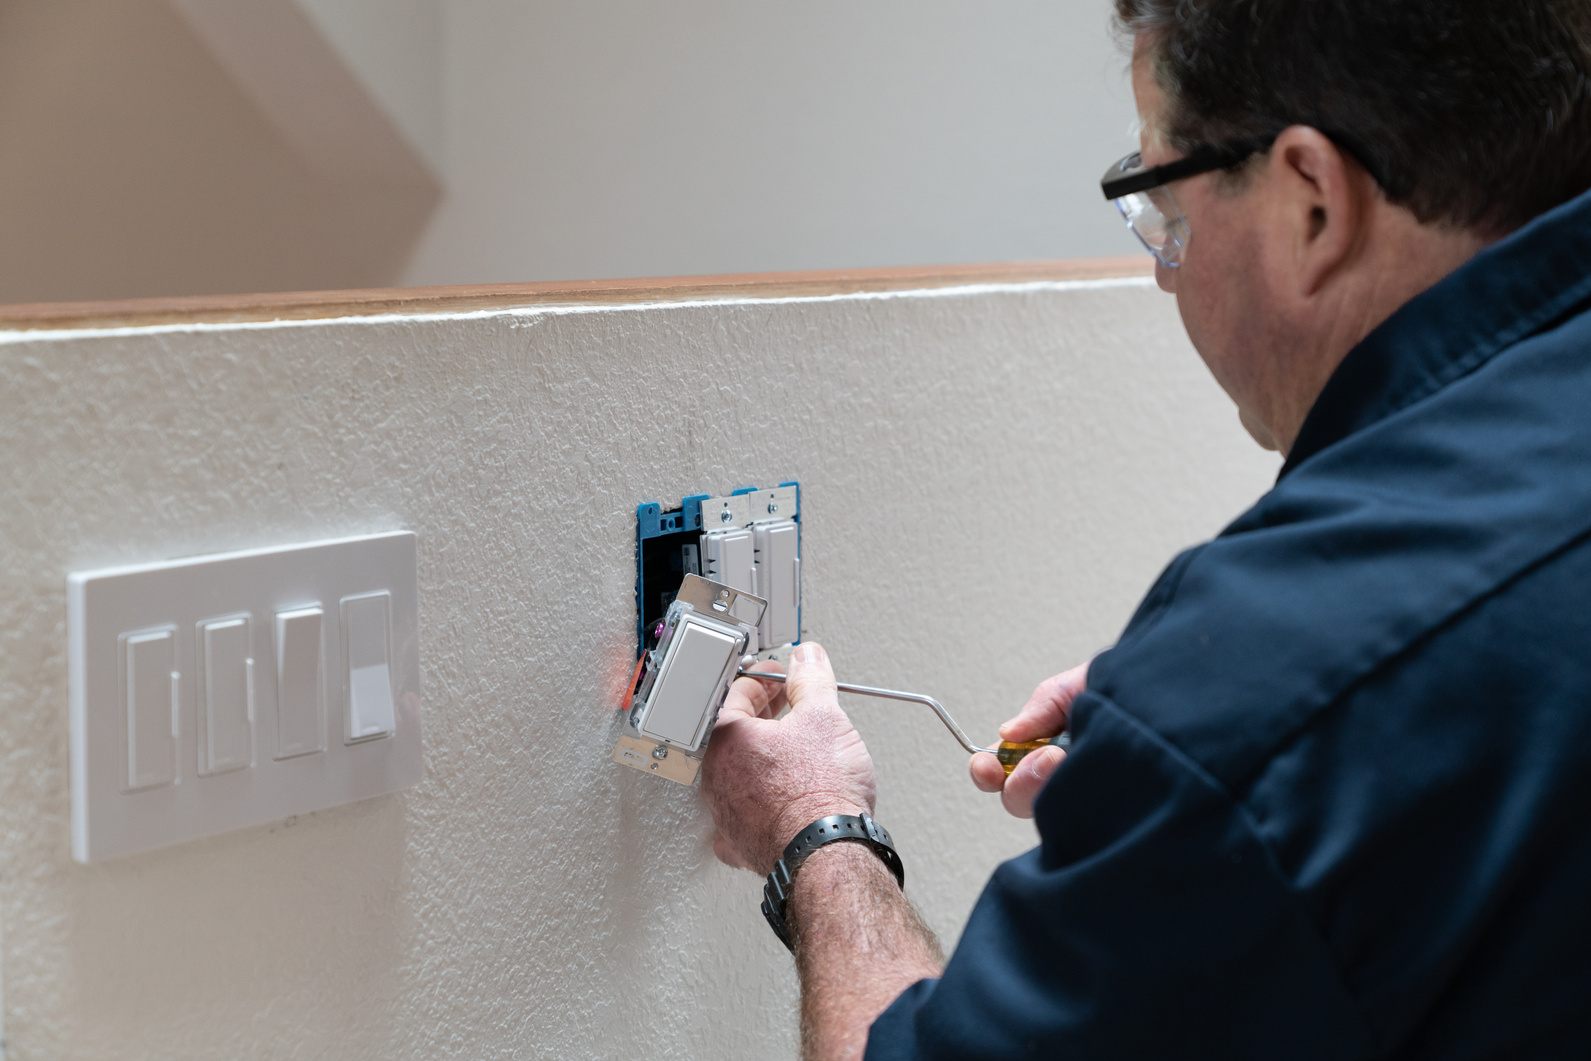 Electrician working in home installing dimmer switched in wall